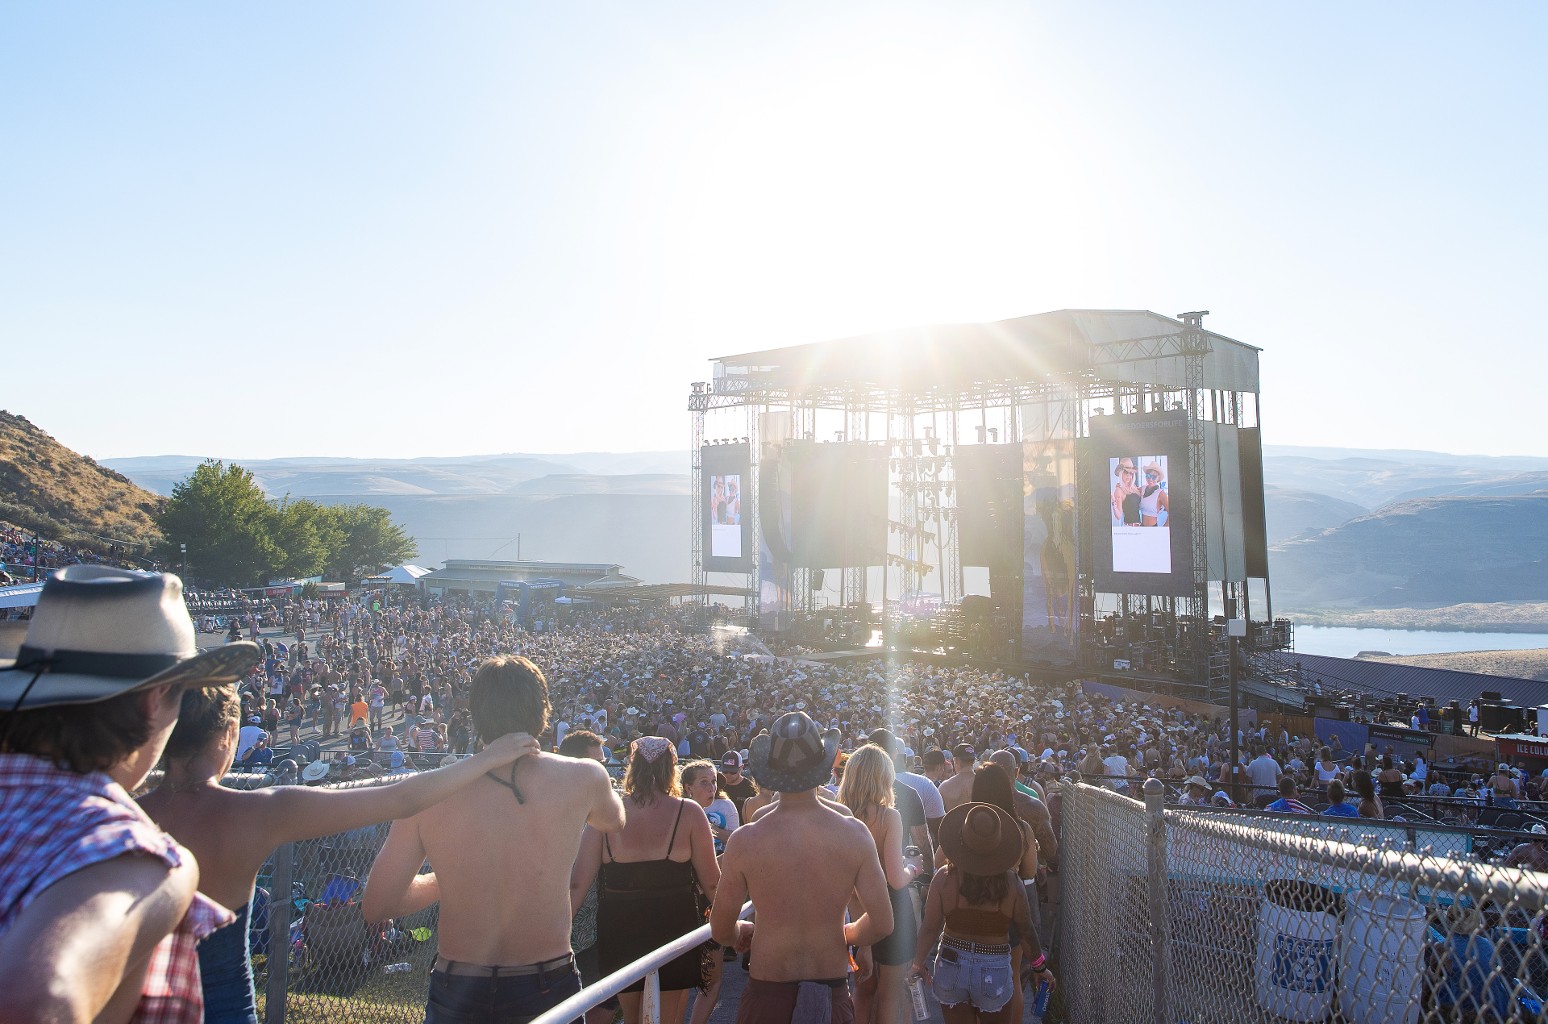 United States: At least three dead in a shooting at a music festival